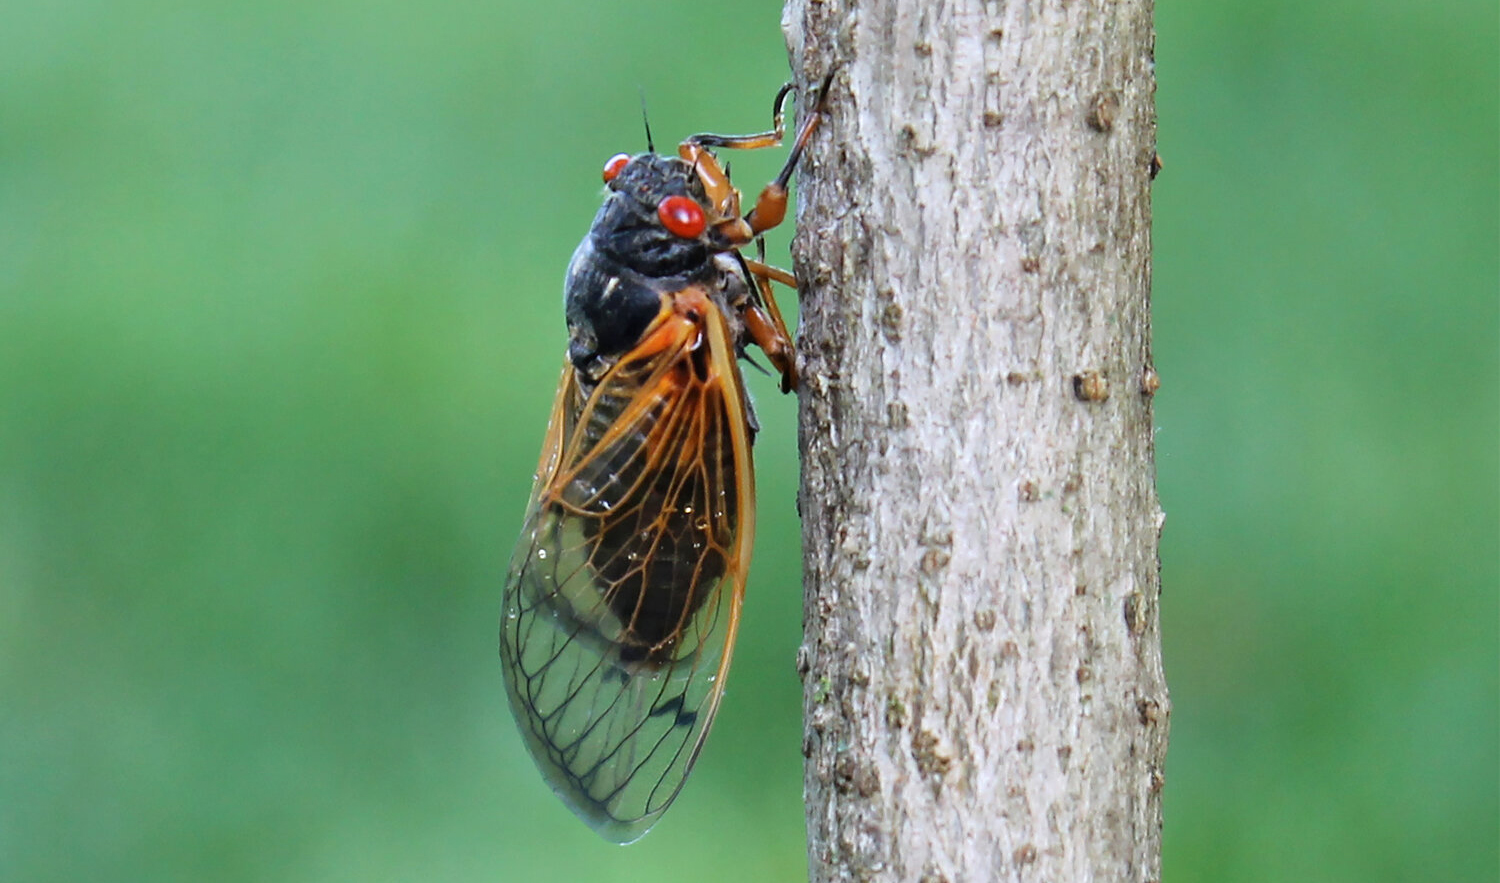 The Great Cicada Invasion Returns to Maryland